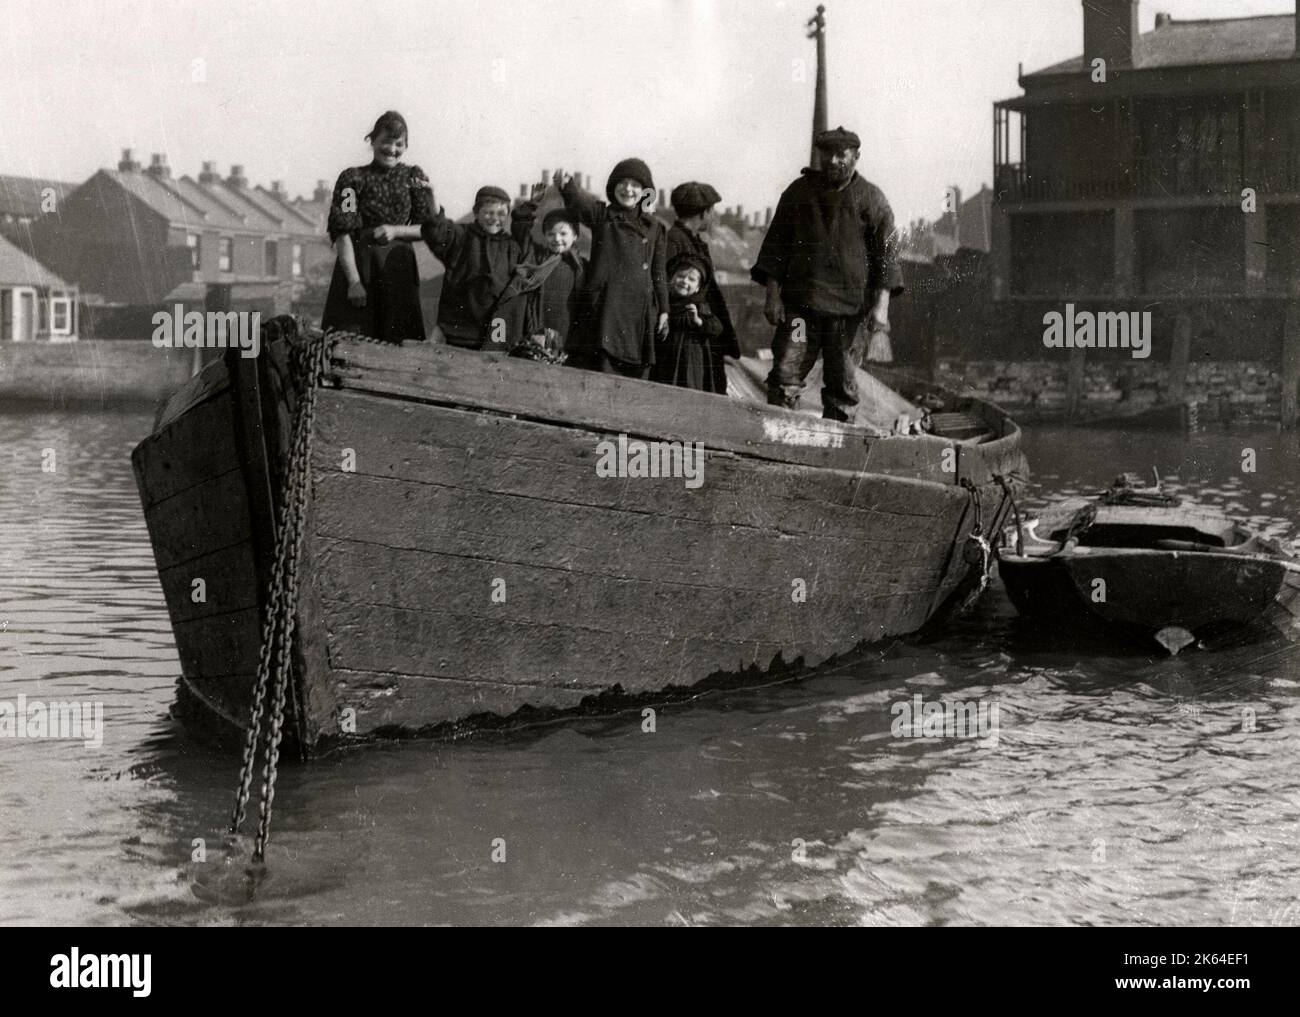 Early 20th century vintage press photograph - family life on board a boat, social history, poverty, England, 1920s Stock Photo